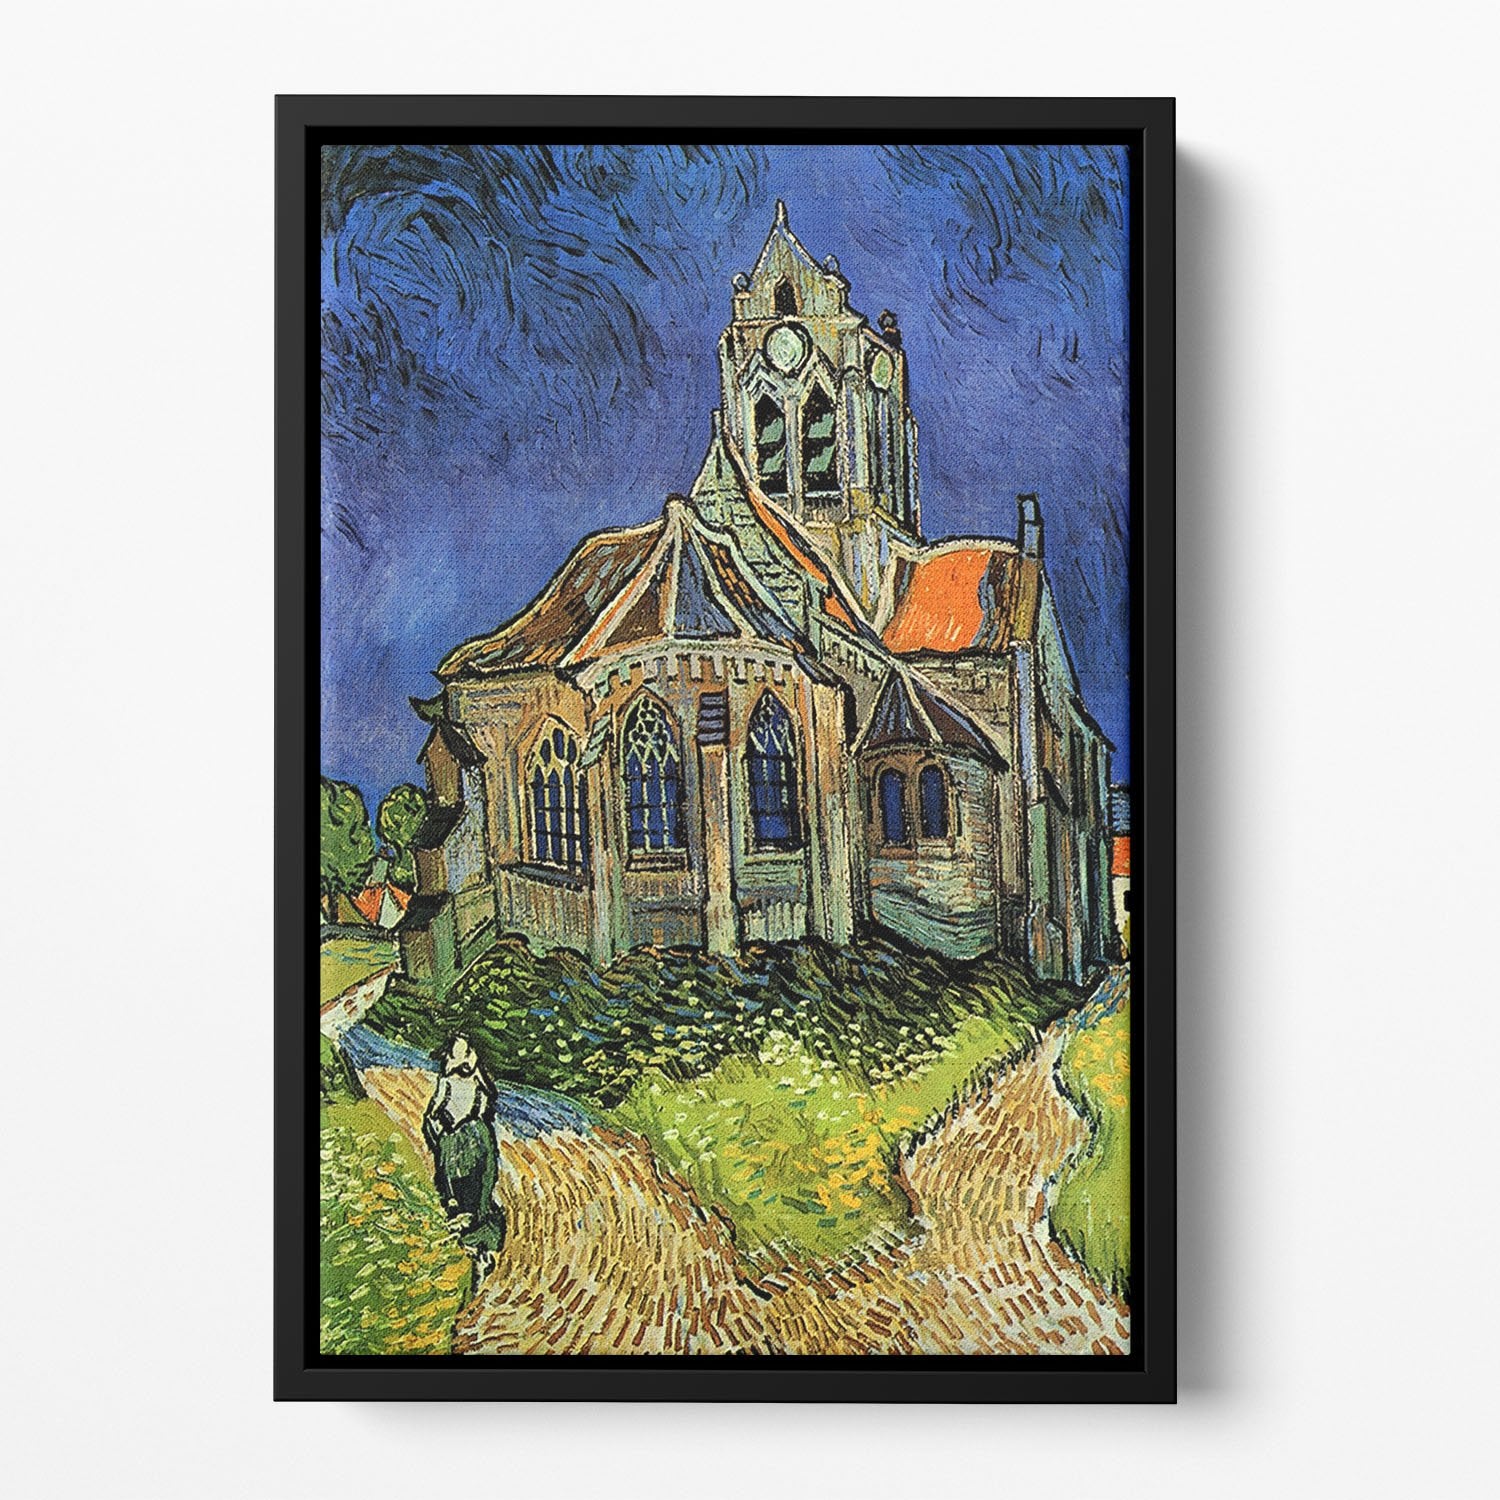 The Church at Auvers by Van Gogh Floating Framed Canvas